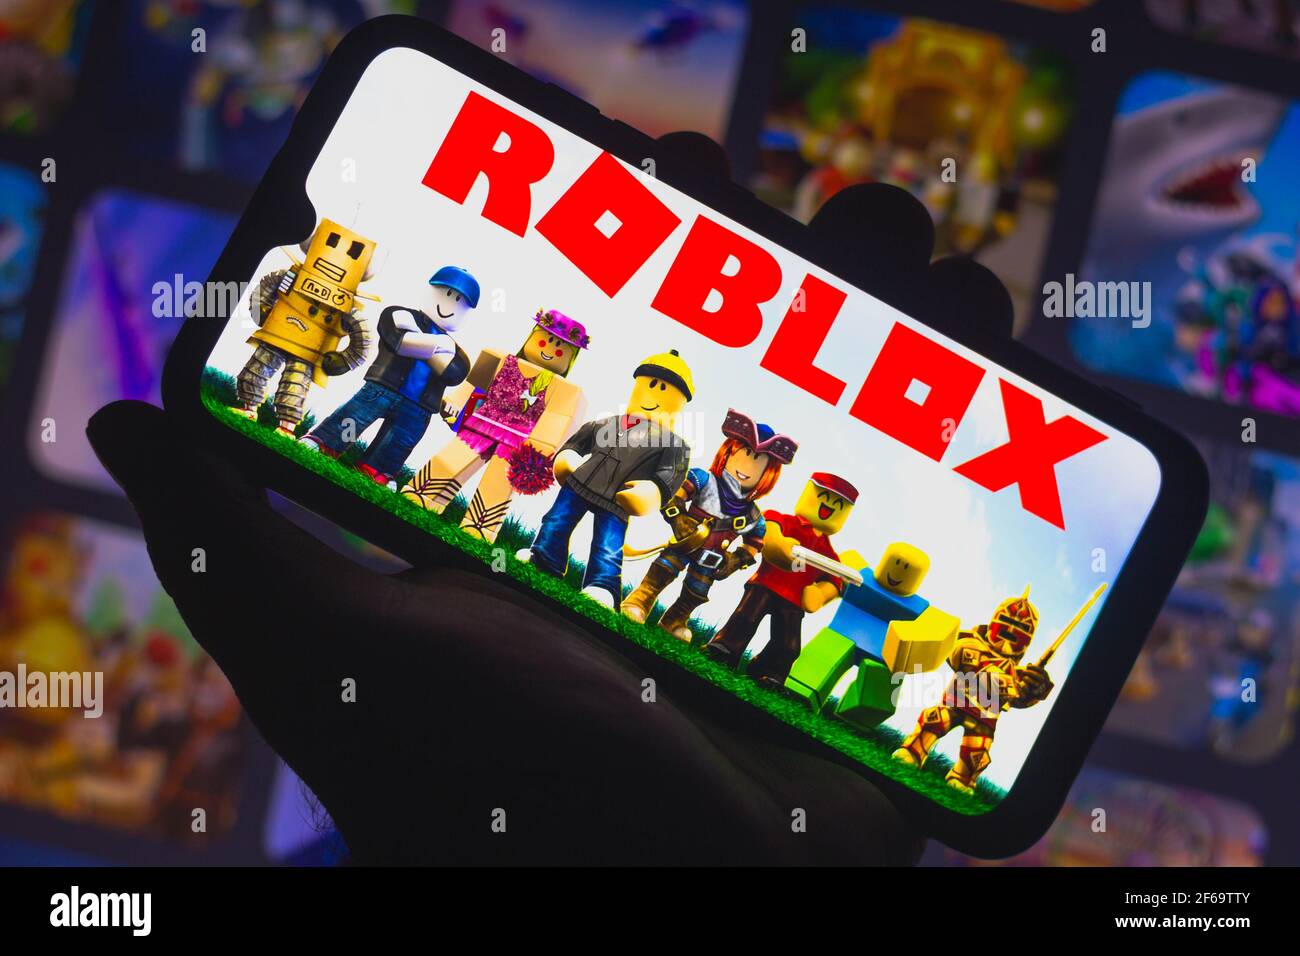 Cali, Colombia - August 15, 2021: Roblox logo on PC screen with keyboard,  mouse and speakers. Roblox is an online game platform and game creation  system. Stock Photo